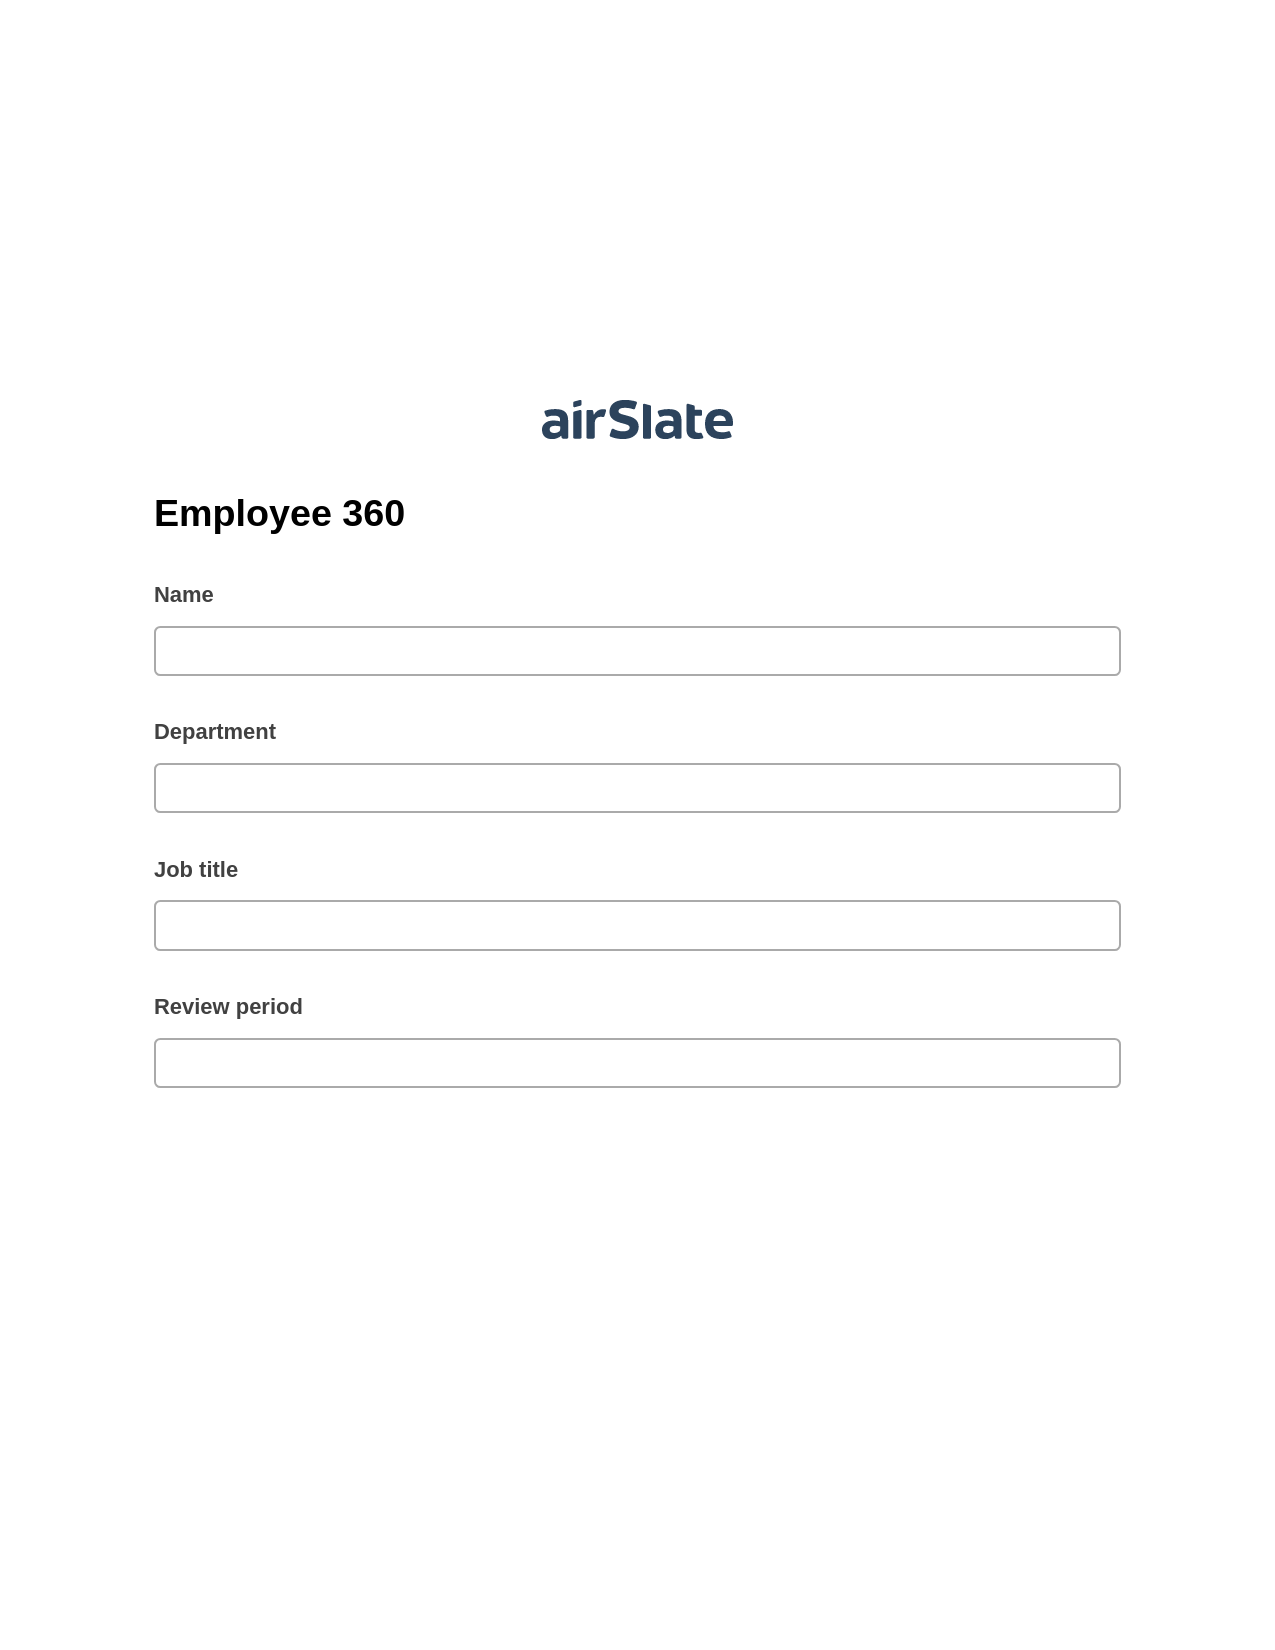 Multirole Employee 360 Pre-fill from Salesforce Records with SOQL Bot, Jira Bot, Archive to Dropbox Bot